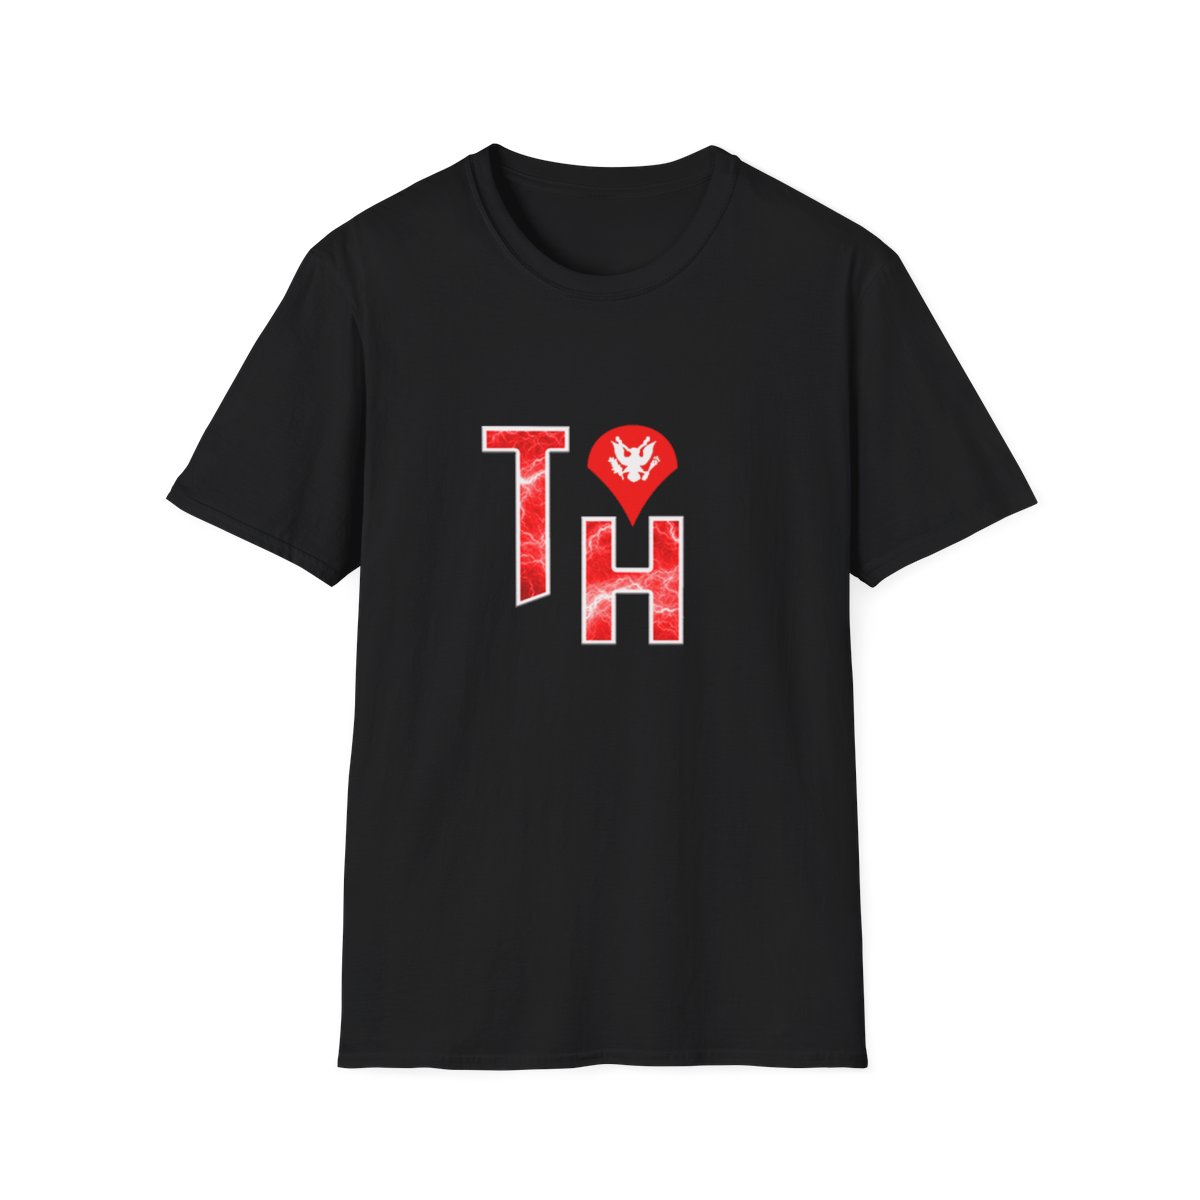 TH Specialist Unisex Softstyle T-Shirt US product main image